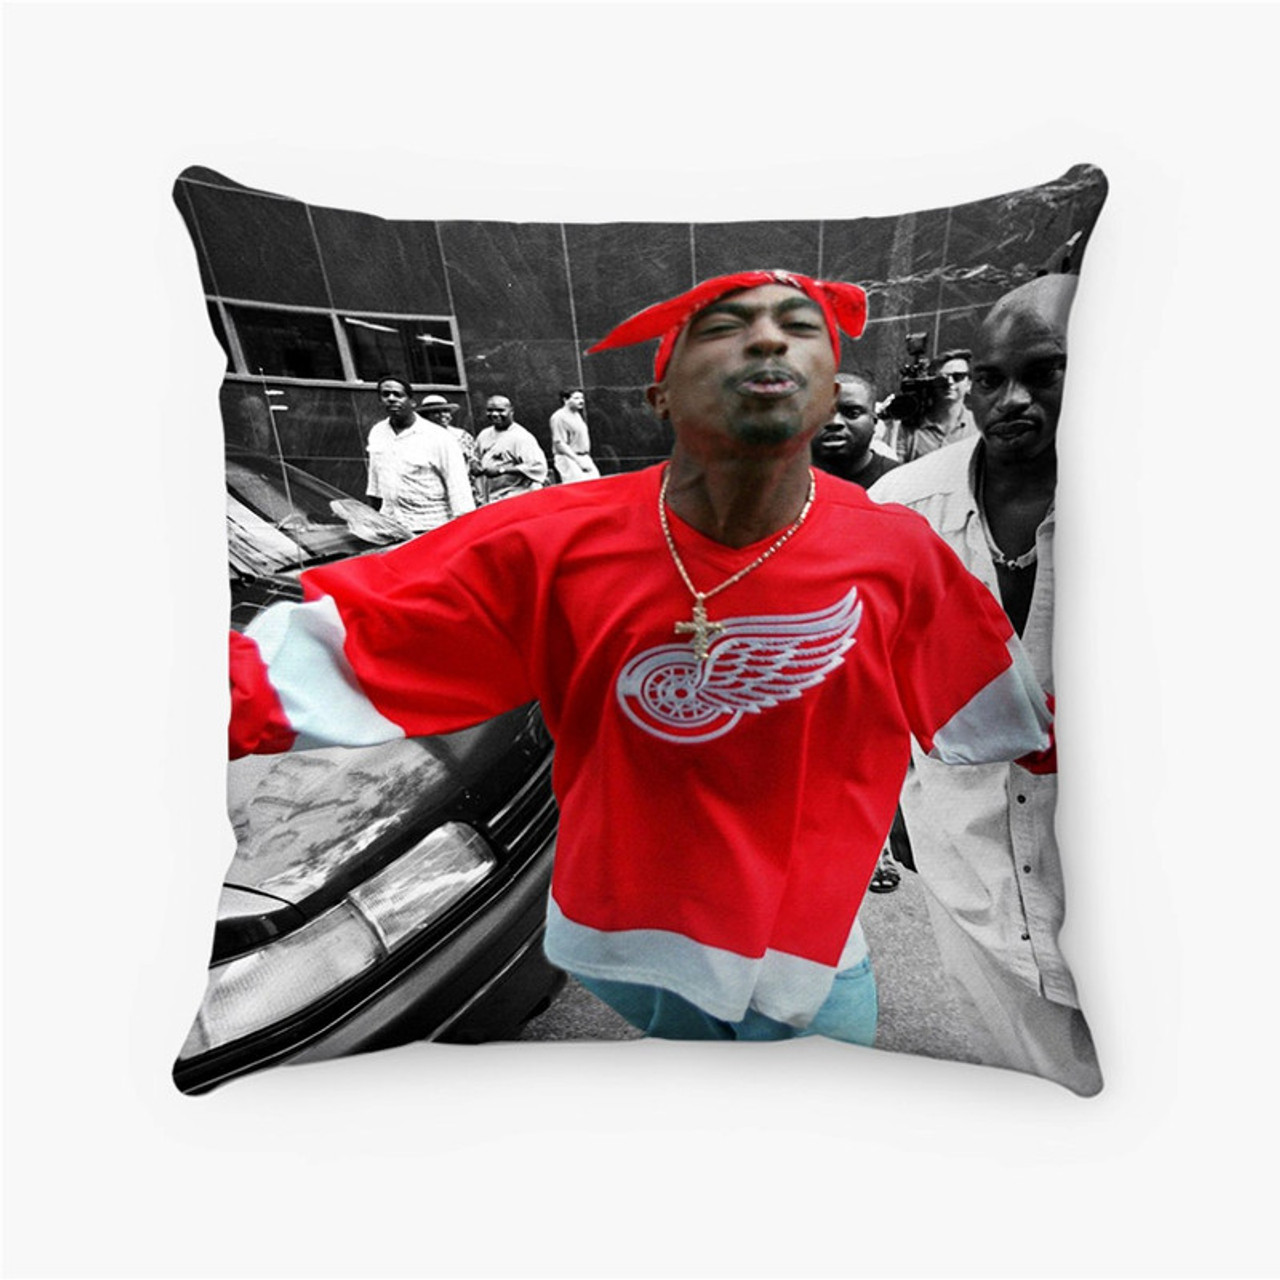 https://cdn11.bigcommerce.com/s-xhmrmcecz5/images/stencil/1280x1280/products/198352/203712/Tupac-Shakur-Red-Wings-T-shirt-Mens-2pac-tee-Custom-Pillow-Case__69762.1673596572.jpg?c=1